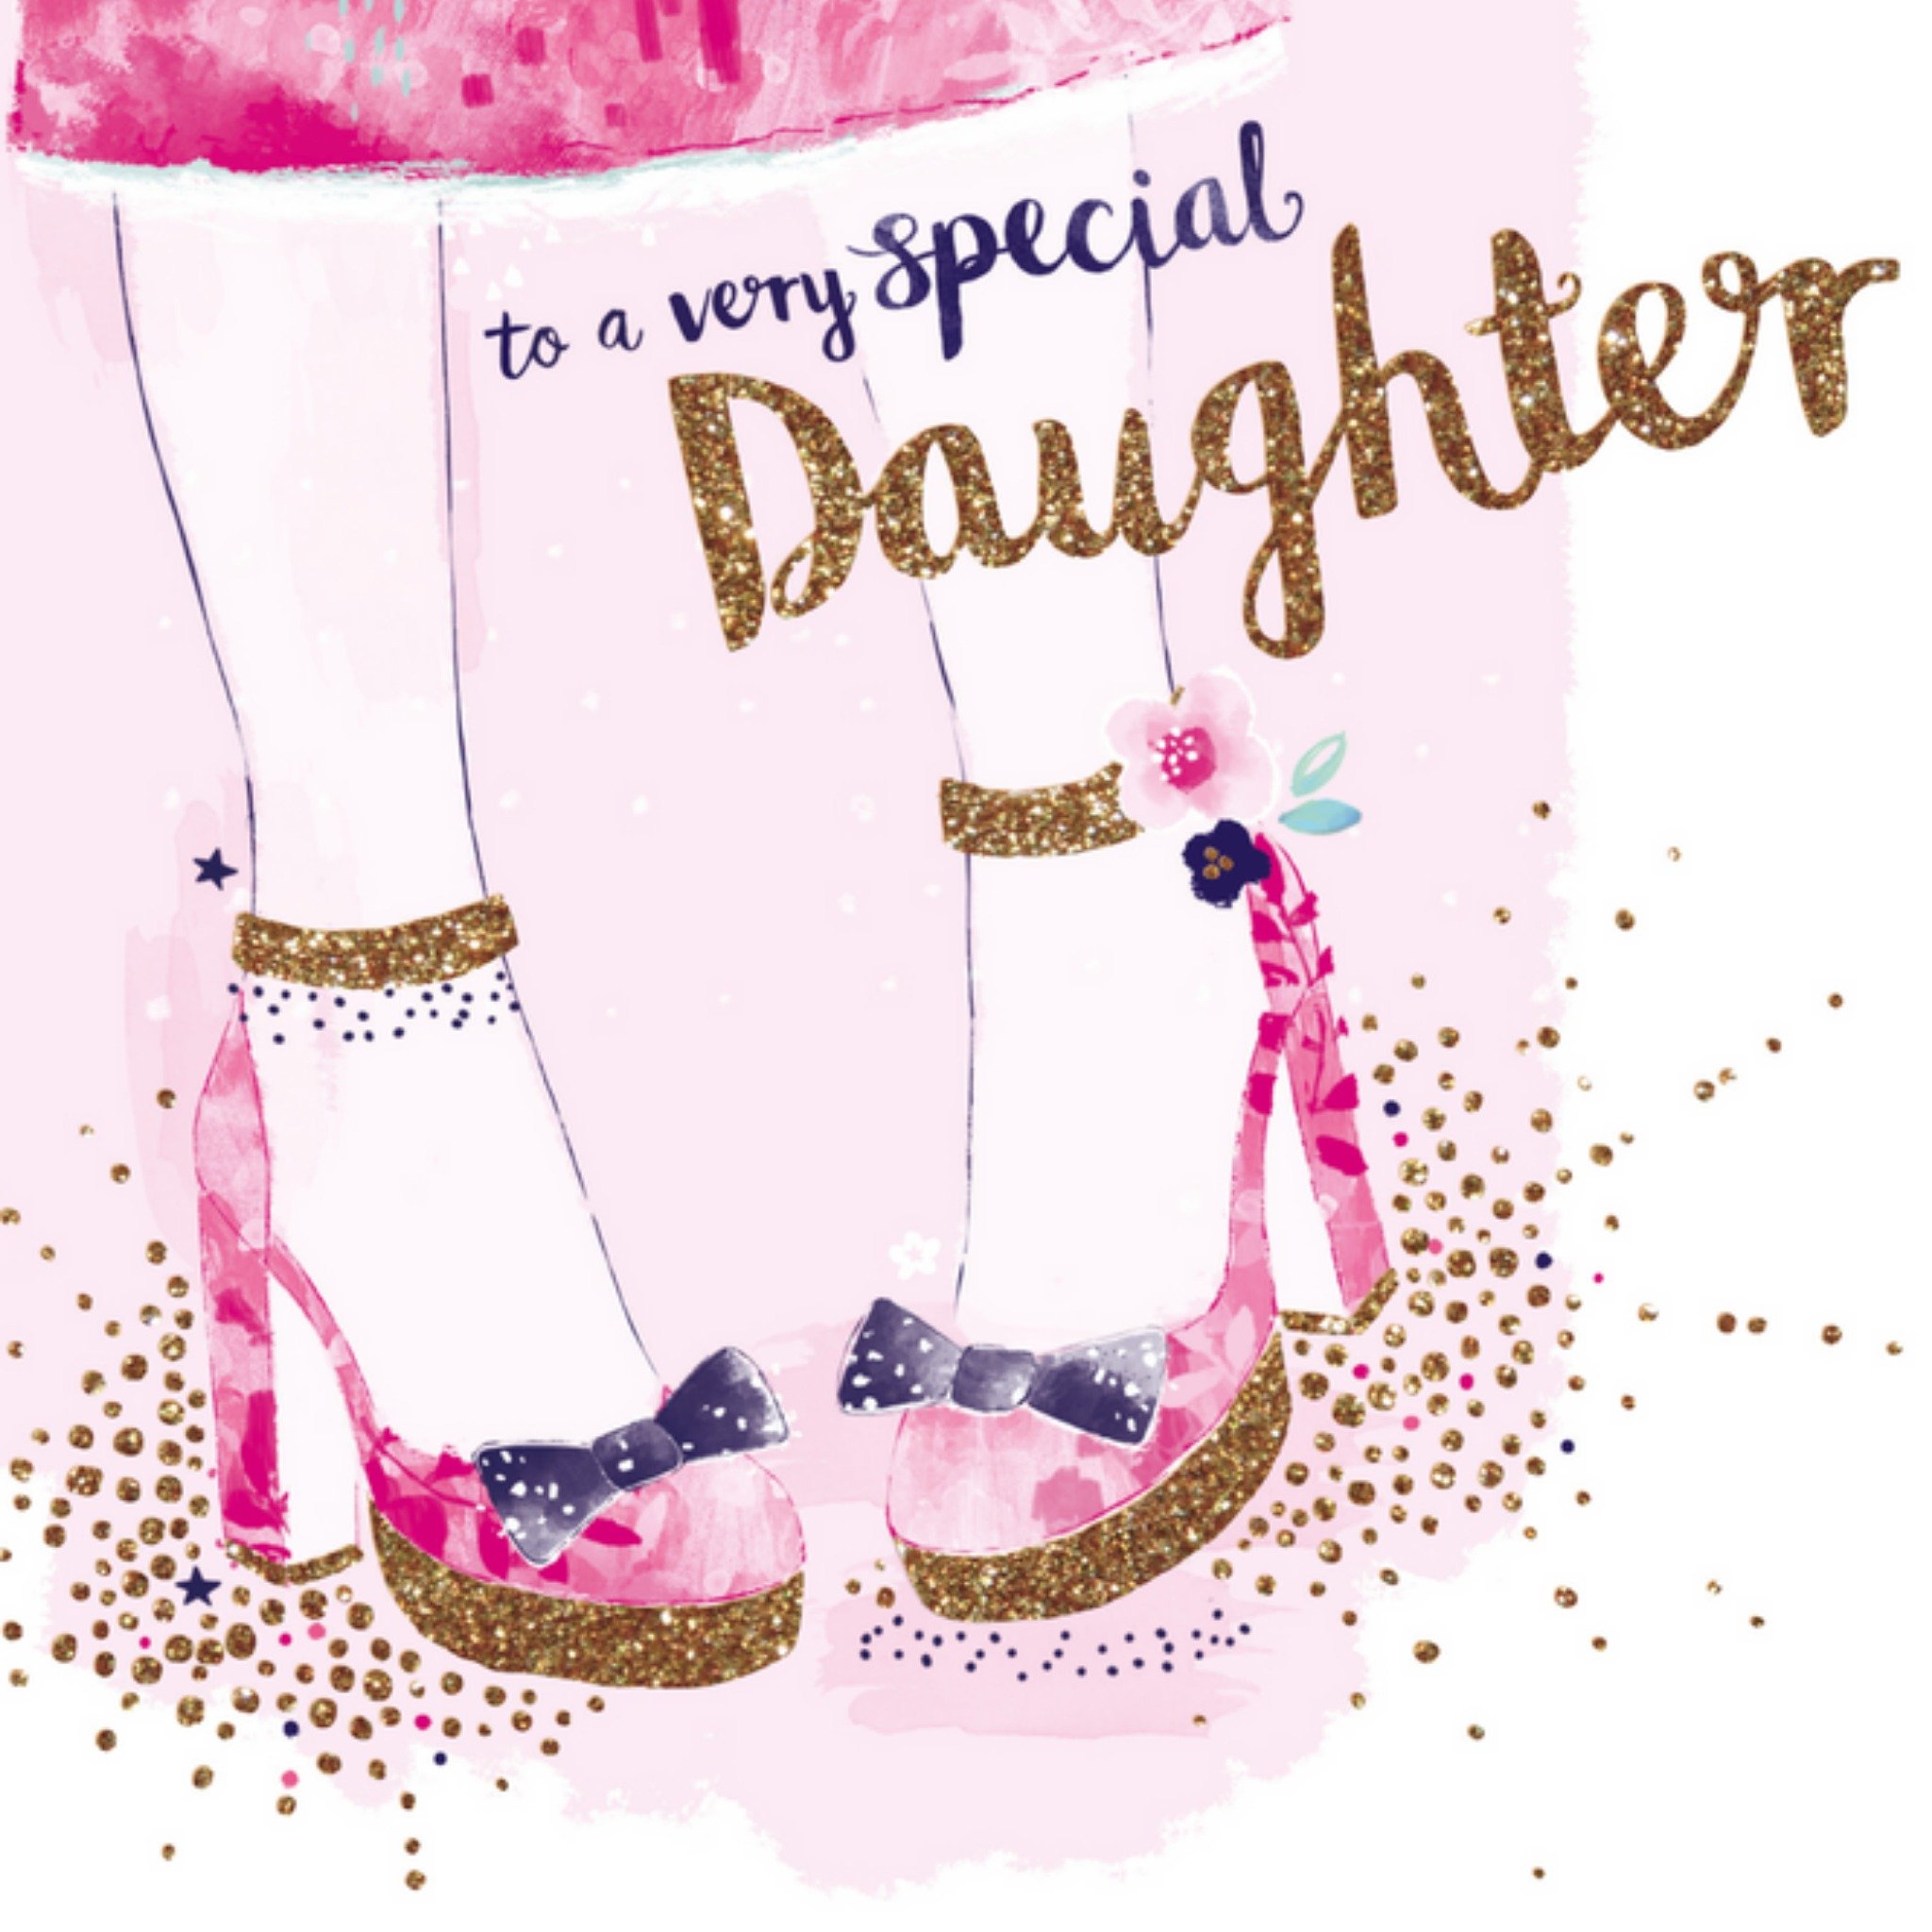 To a very special daughter